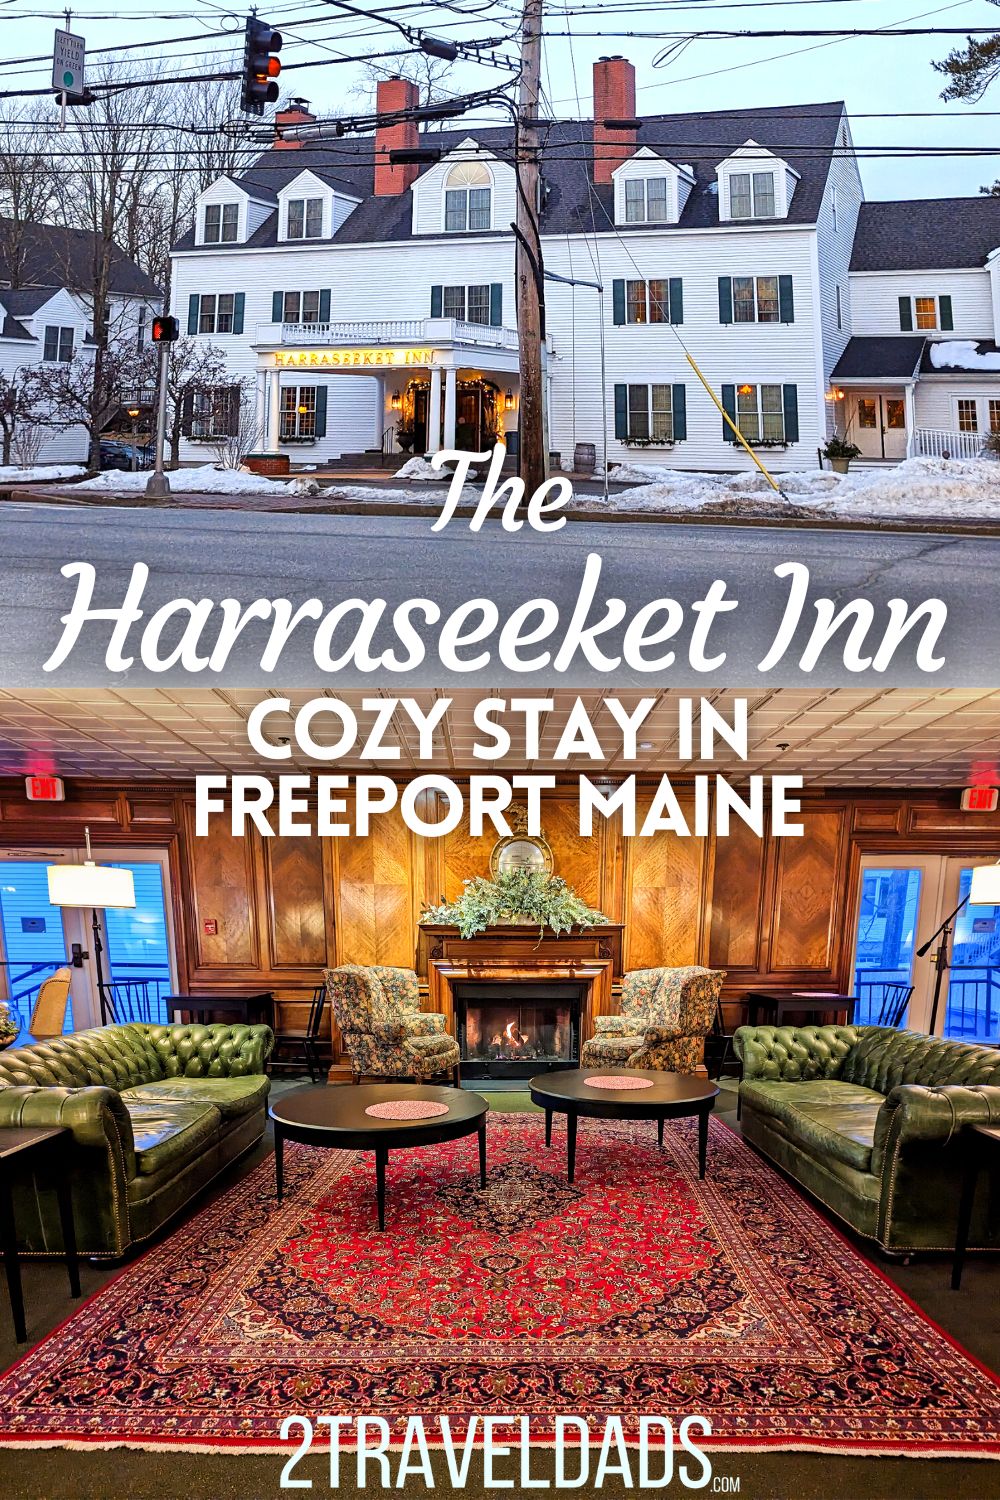 The Harraseeket Inn in Freeport, Maine is one of the coziest, peaceful places we've stayed. Get the details on staying at the Harraseeket, things to do in Freeport, and ideas for visiting Maine in any season.